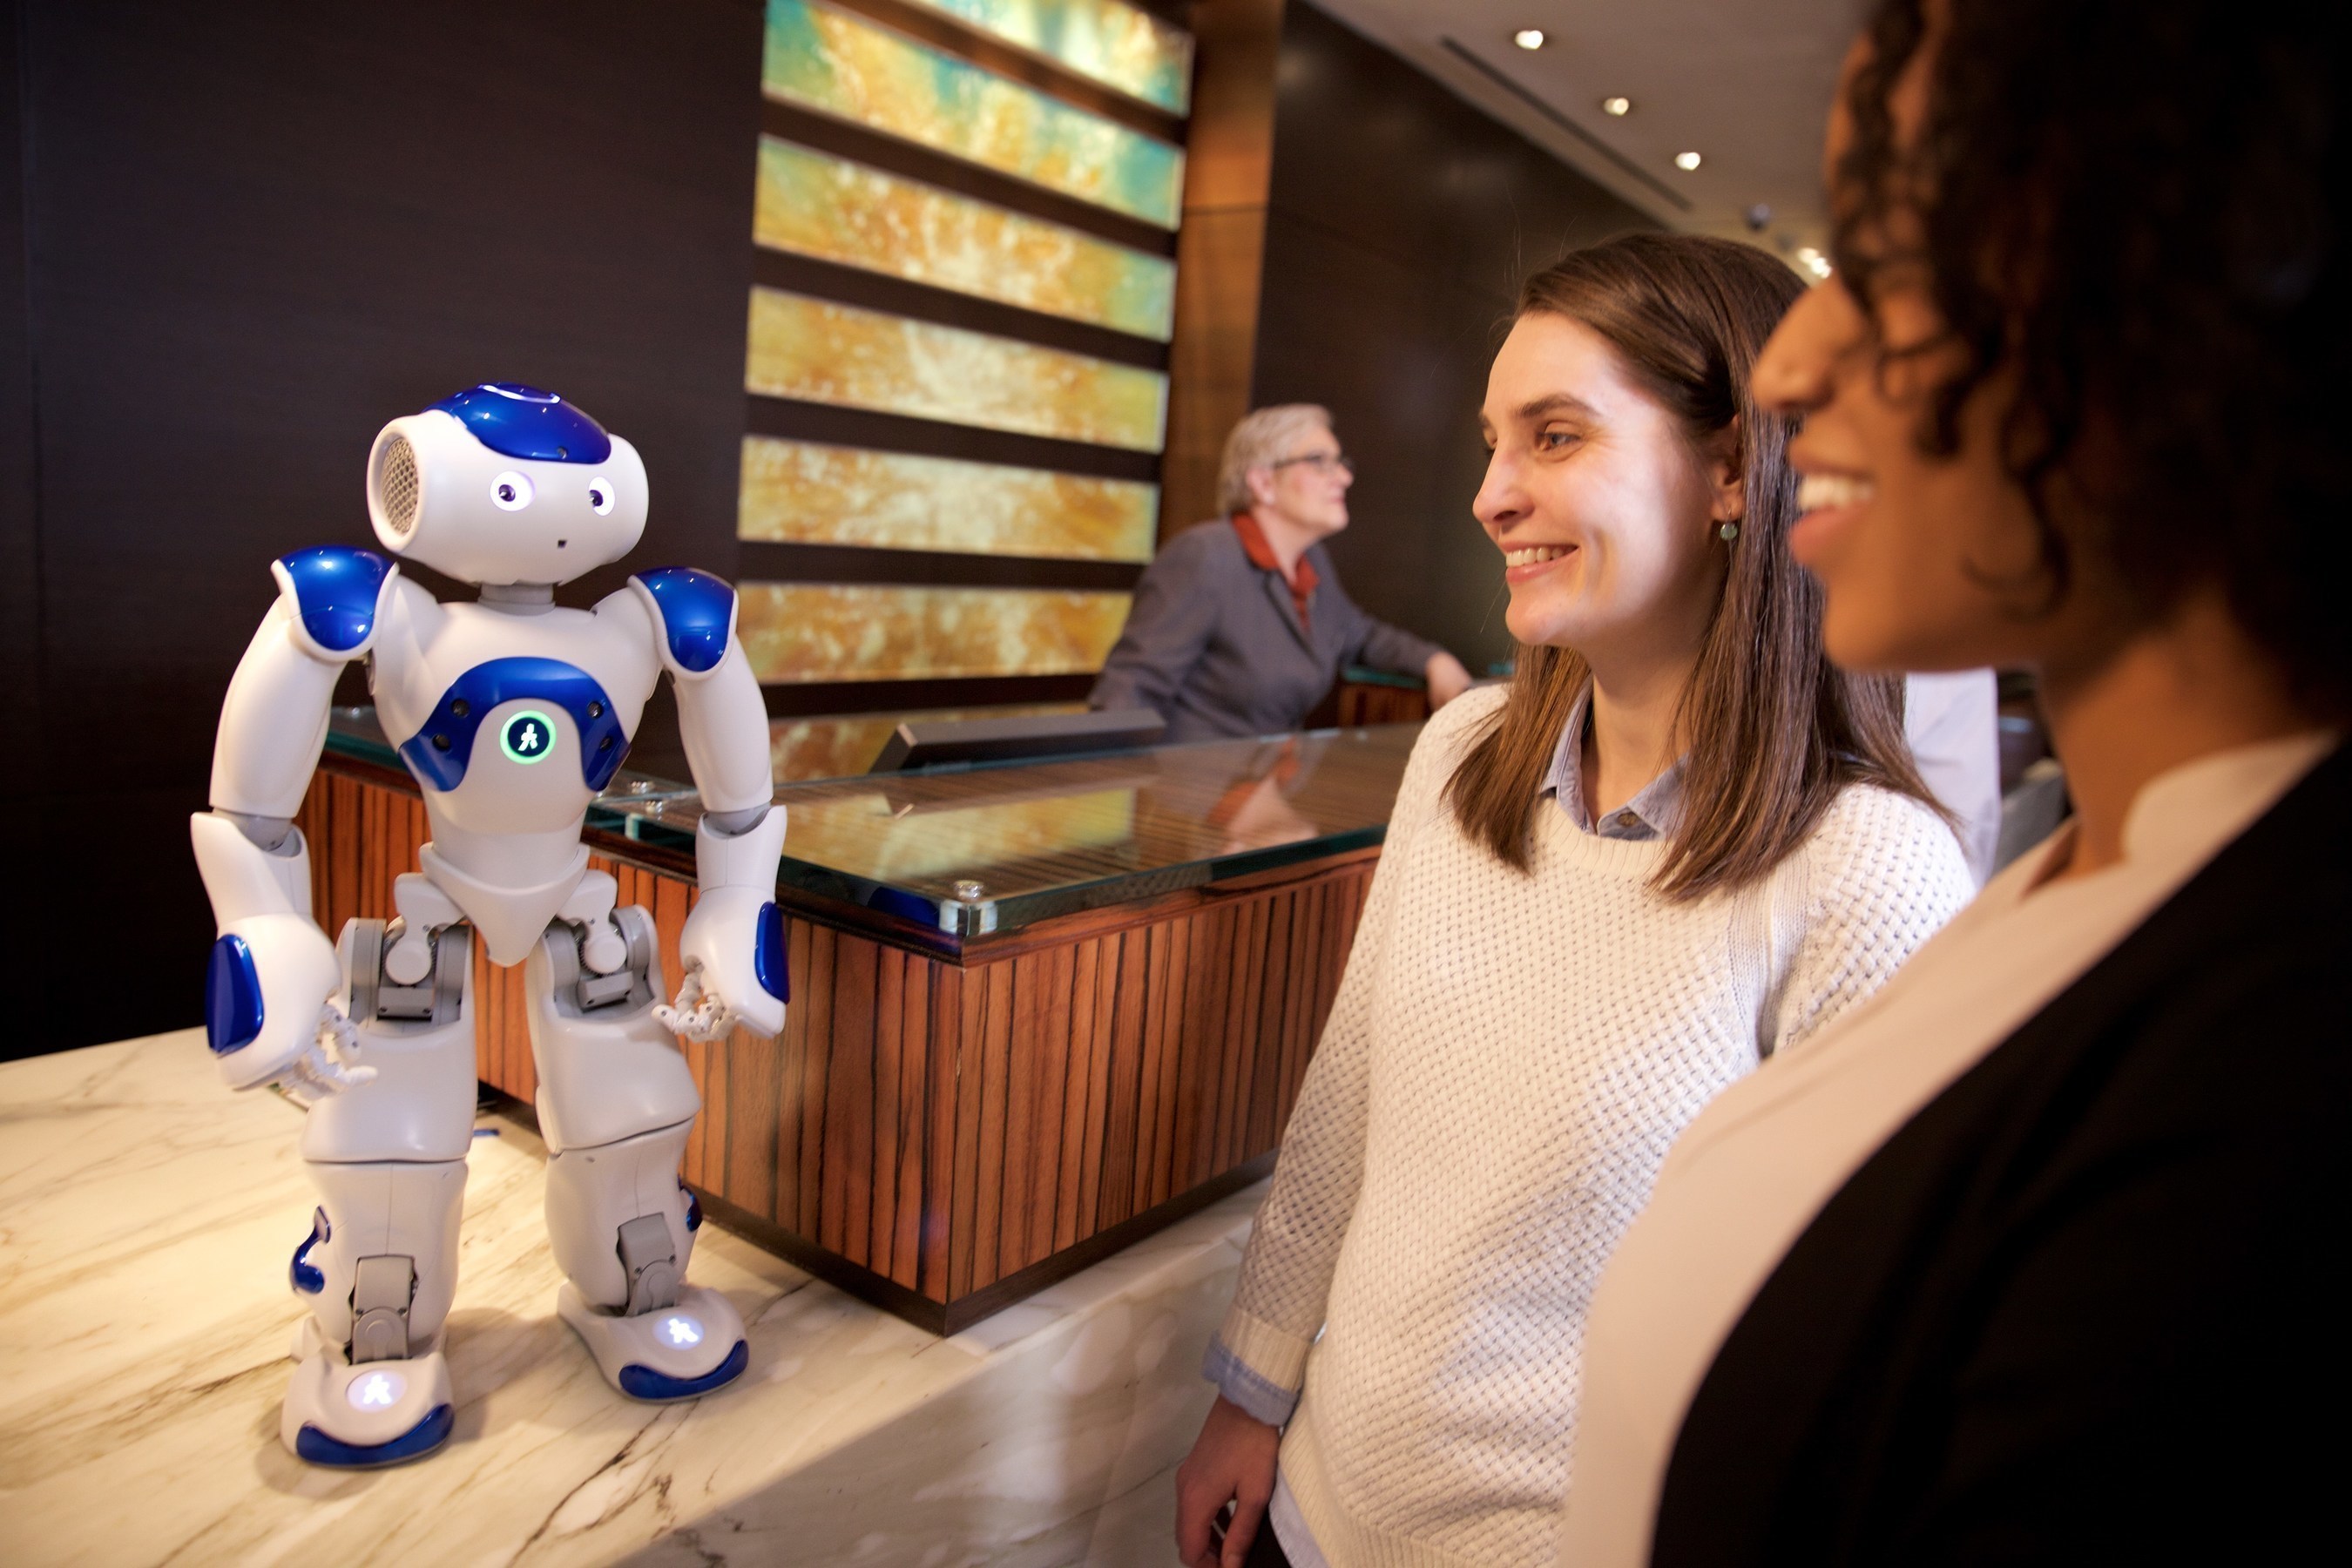 Visitors to the Hilton Hotel in McLean, Va. meet "Connie," a robot concierge named after Conrad Hilton and powered by IBM Watson and WayBlazer. Connie, in pilot testing at the hotel, uses cognitive computing and machine learning to answer questions posed in natural language about the hotel, local tourist attractions and restaurants -- while learning with each interaction. (Photo courtesy of Green Buzz Agency/Feature Photo Service for IBM)